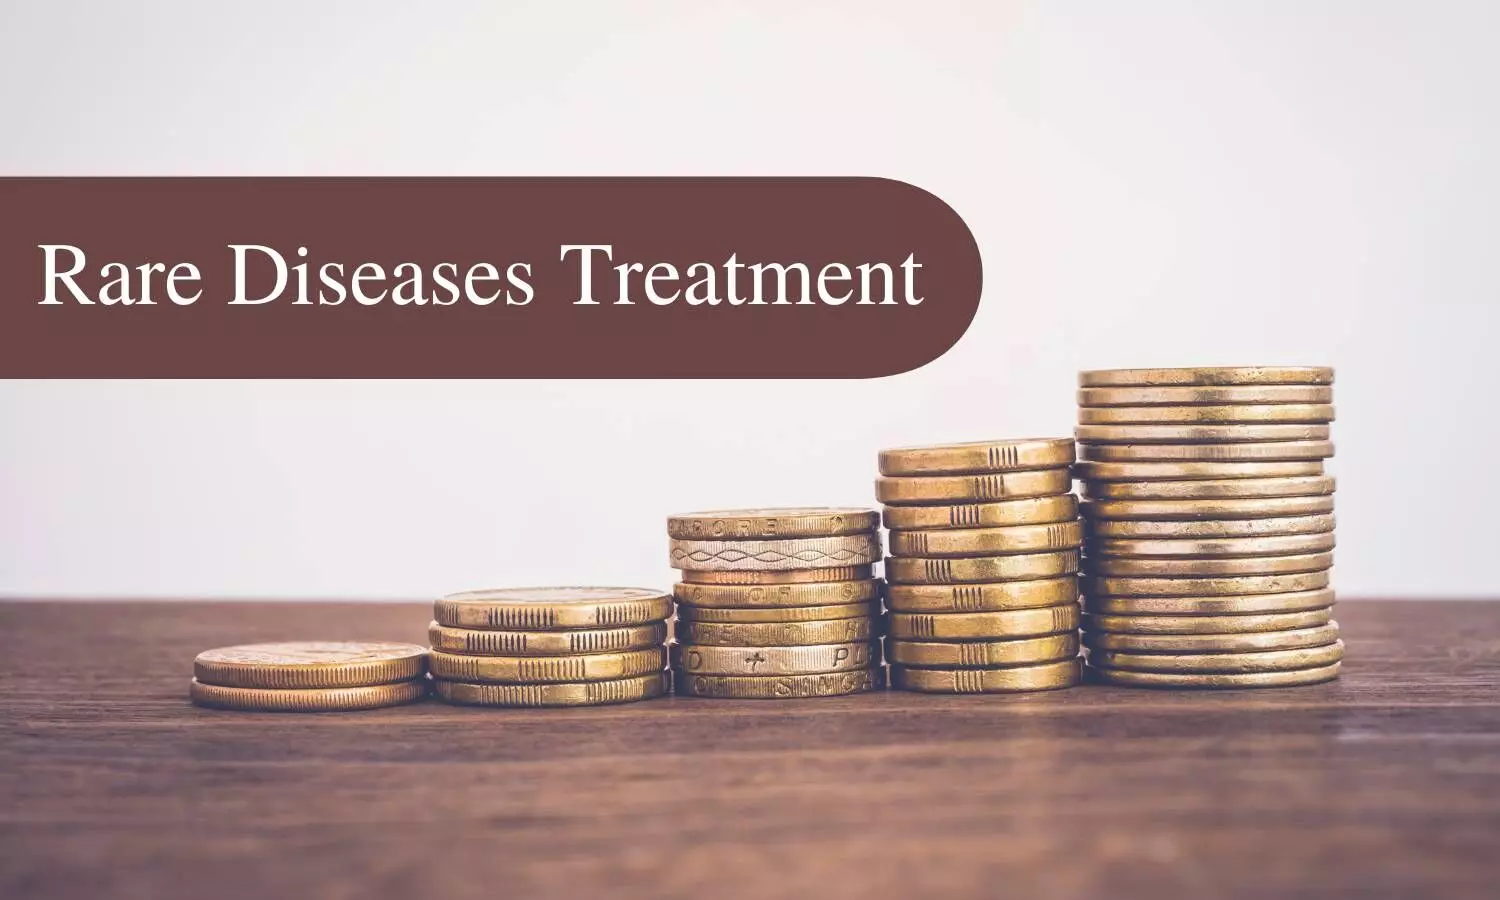 Health Ministry grants Rs 22.20 crore fund for treatment of 134 rare diseases patients